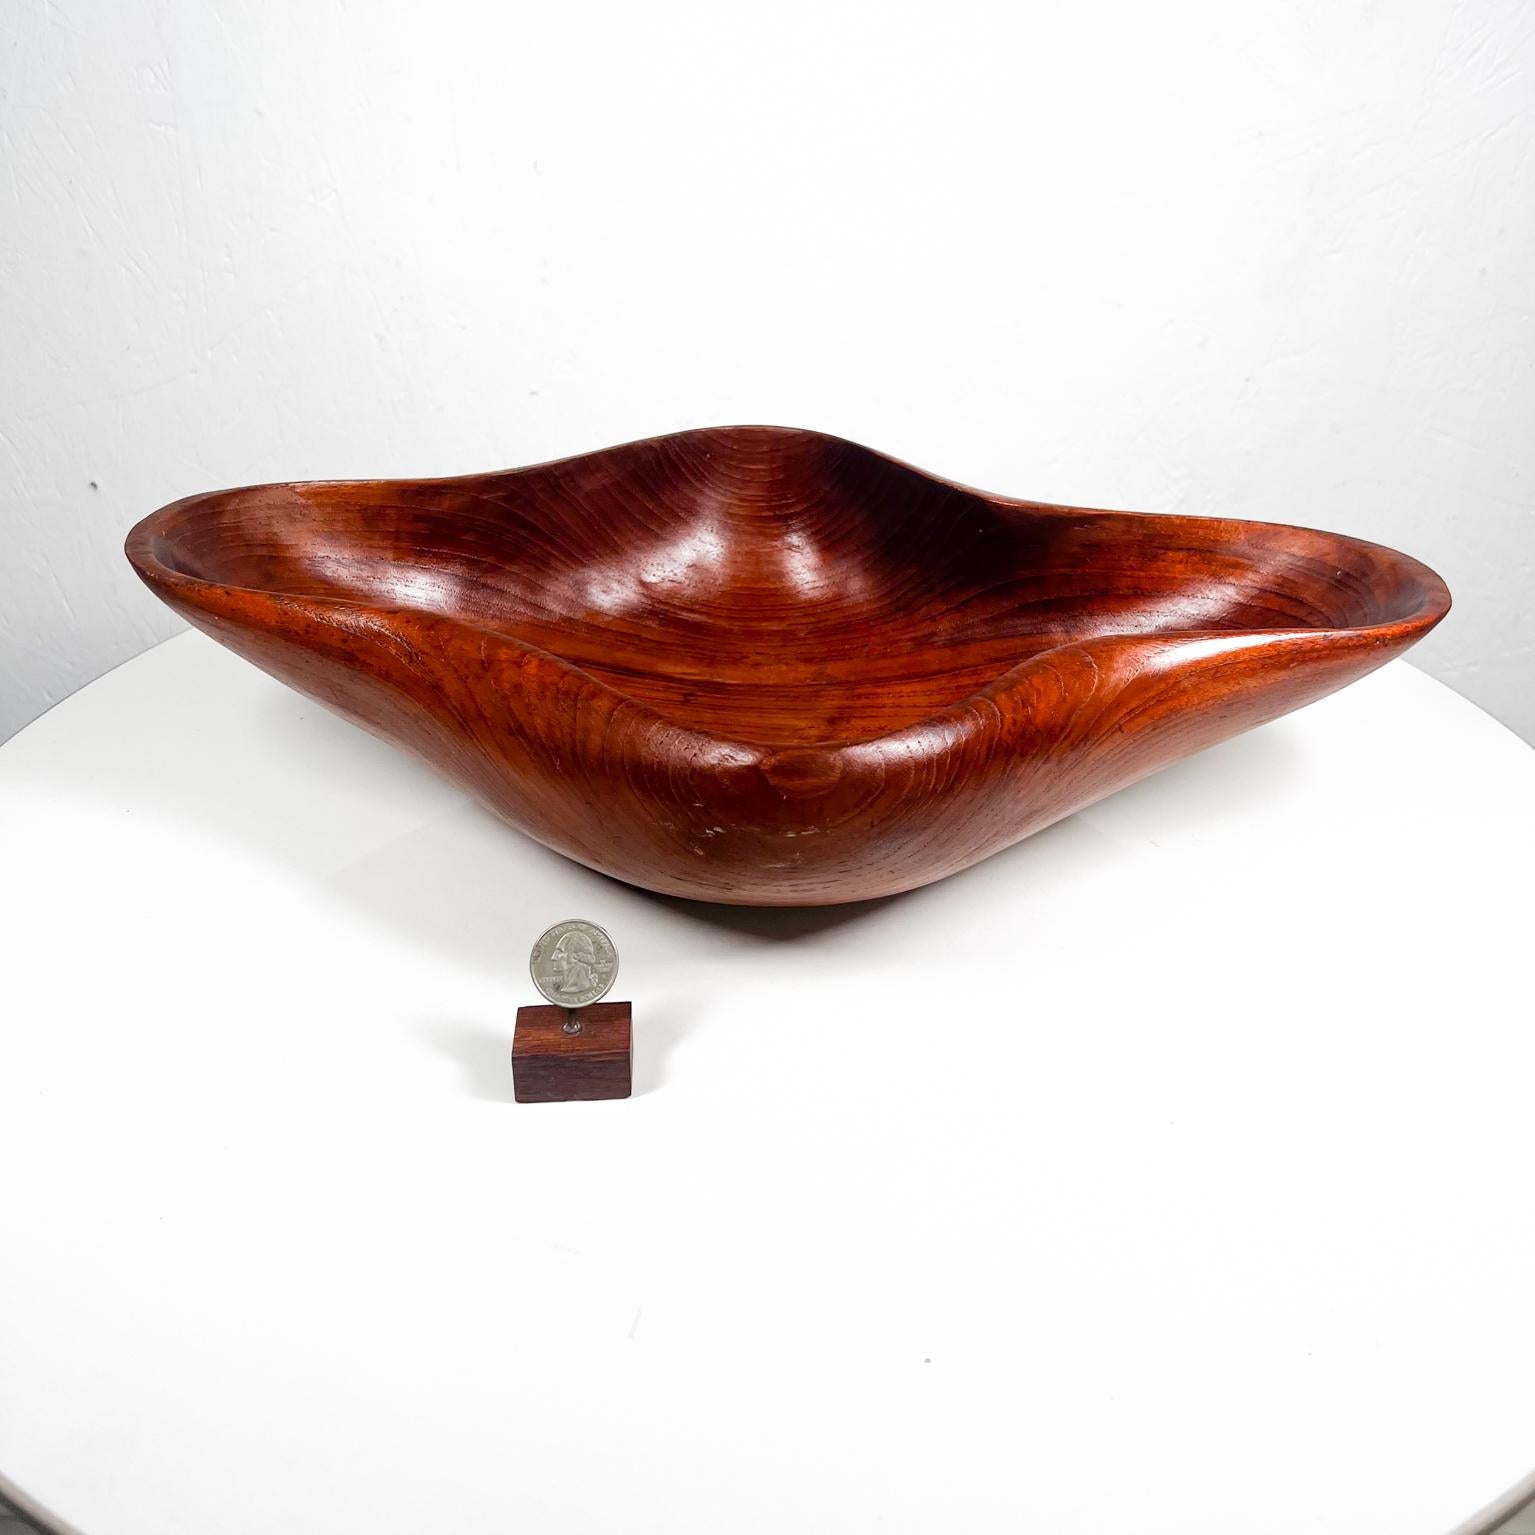 1970s Sculptural Organic Modern Bowl in teak wood
17 w x 10.38 D x 4 H
Preowned original vintage
Please refer to images.